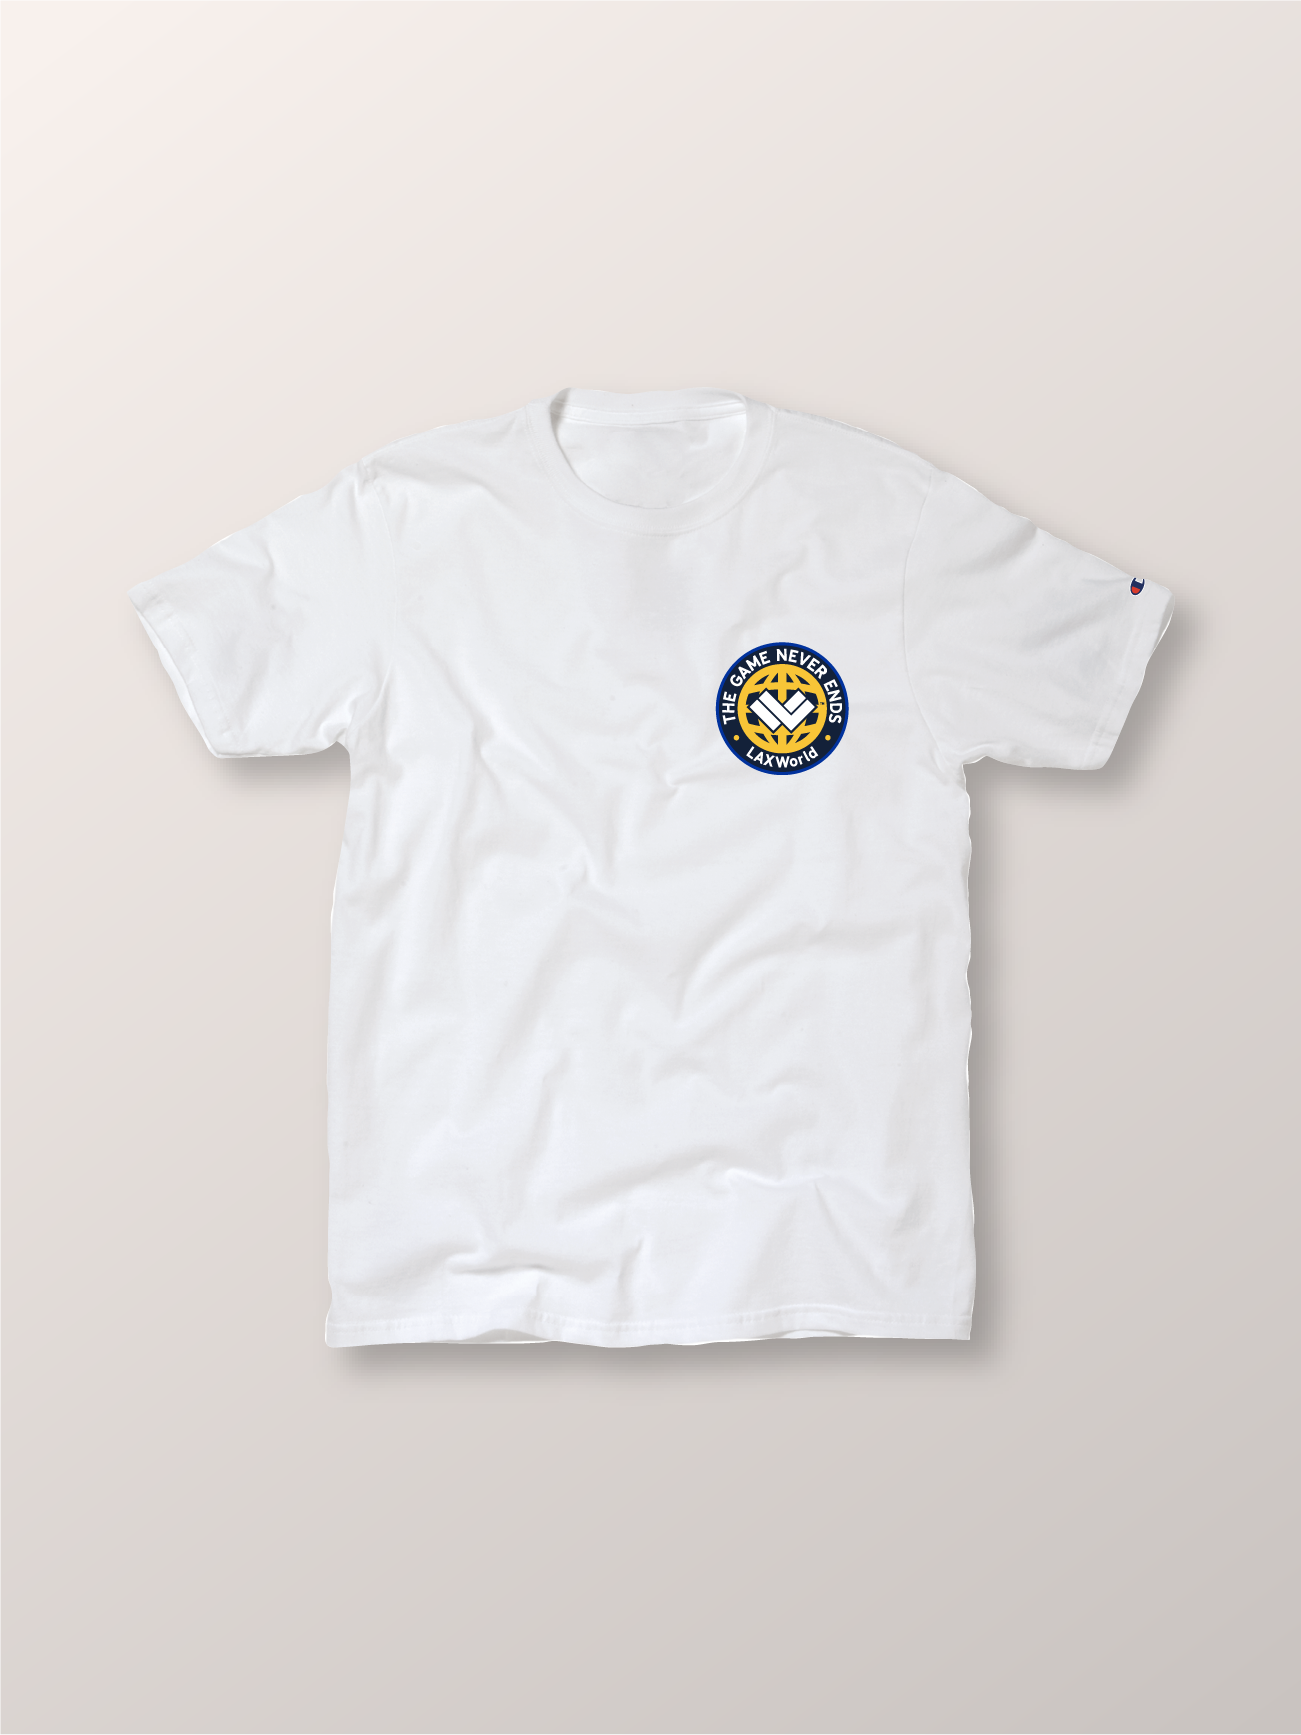 Classic Soul Patch Champion’s White Lacrosse Tee - White Front 